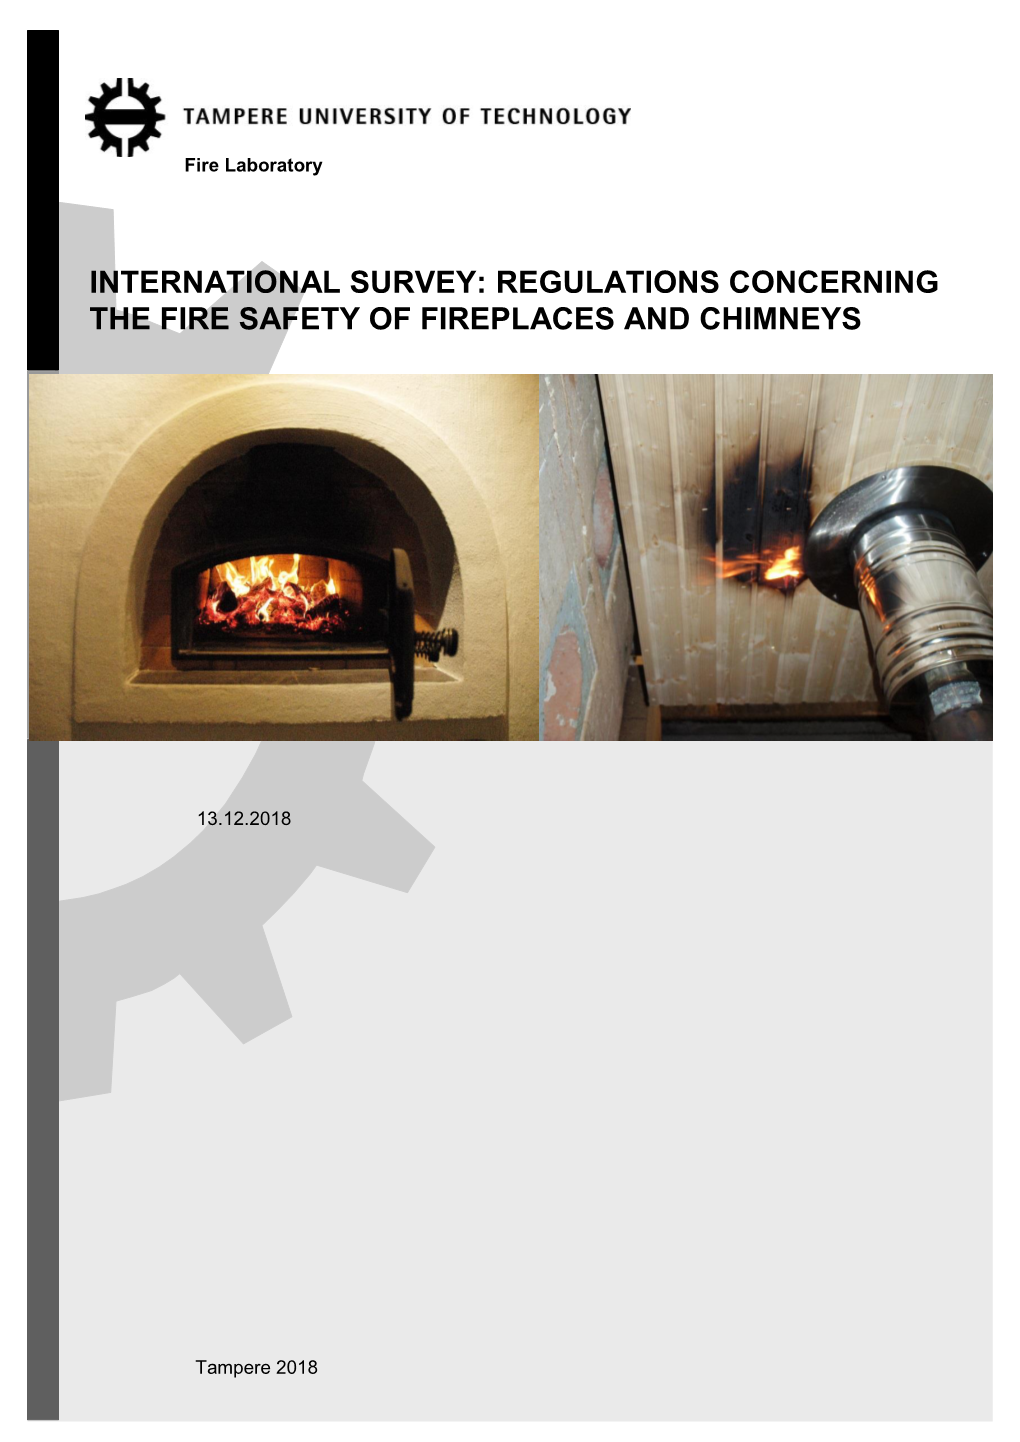 Regulations Concerning the Fire Safety of Fireplaces and Chimneys